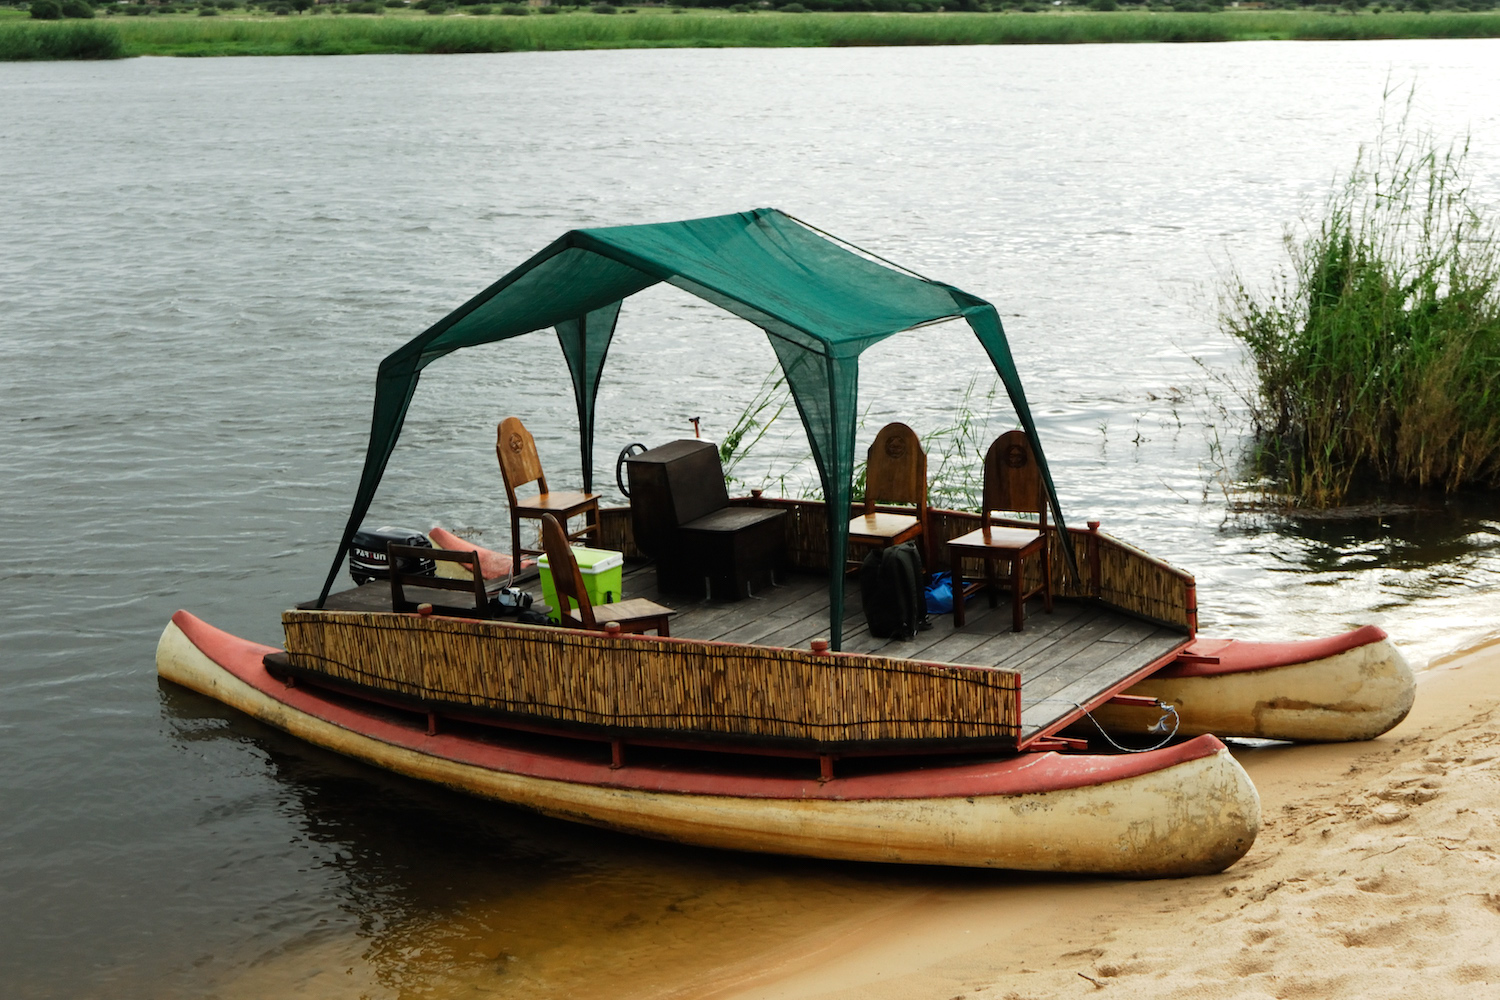 A simple boat with chairs and a shade covering that is built on top of a pair of canoes.